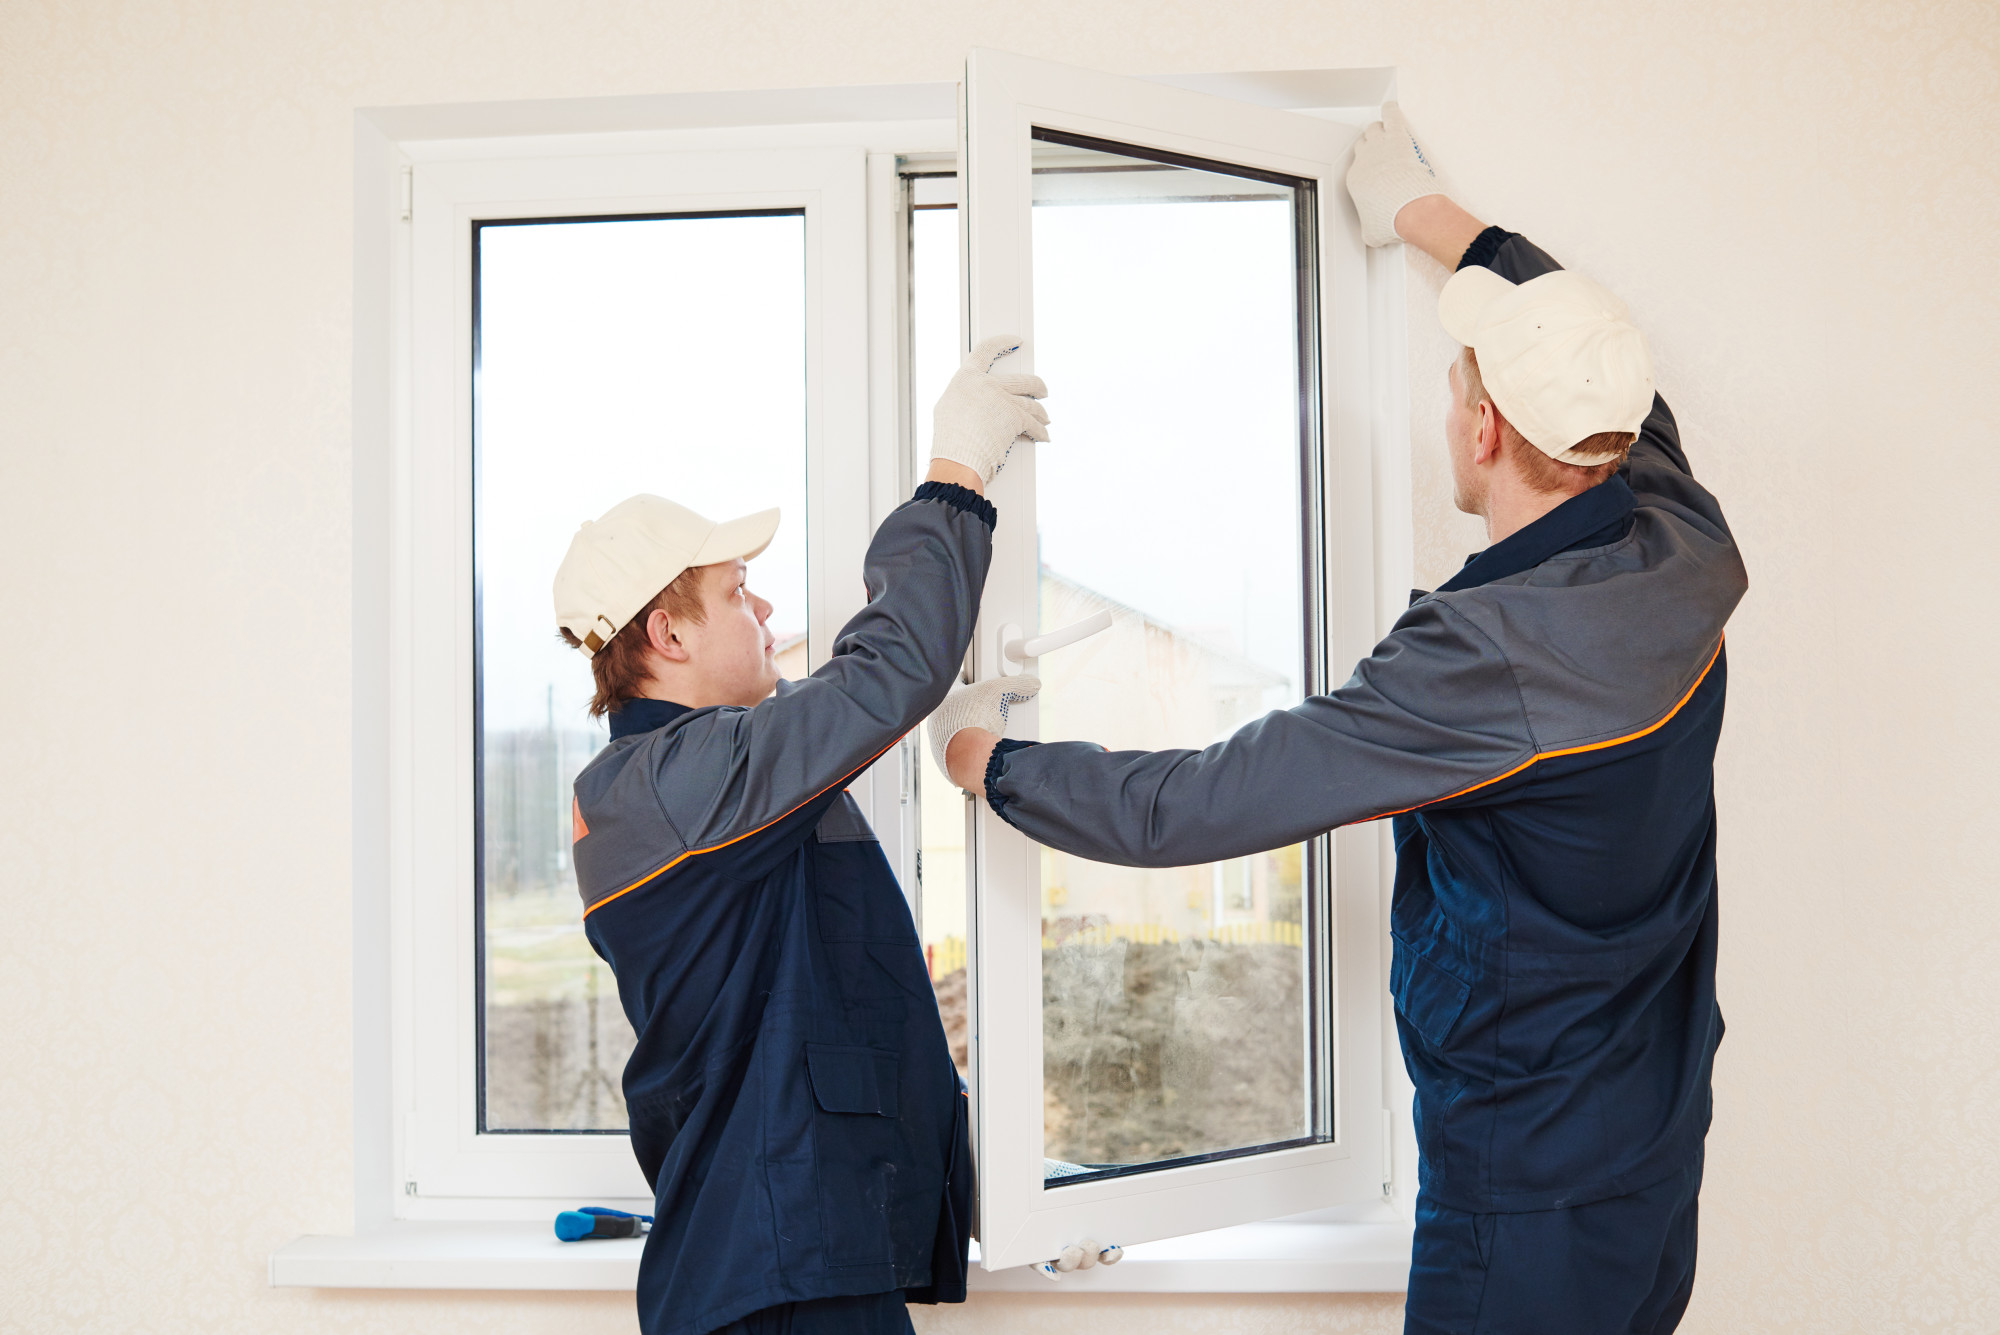 How Much Does Home Window Replacement Cost?